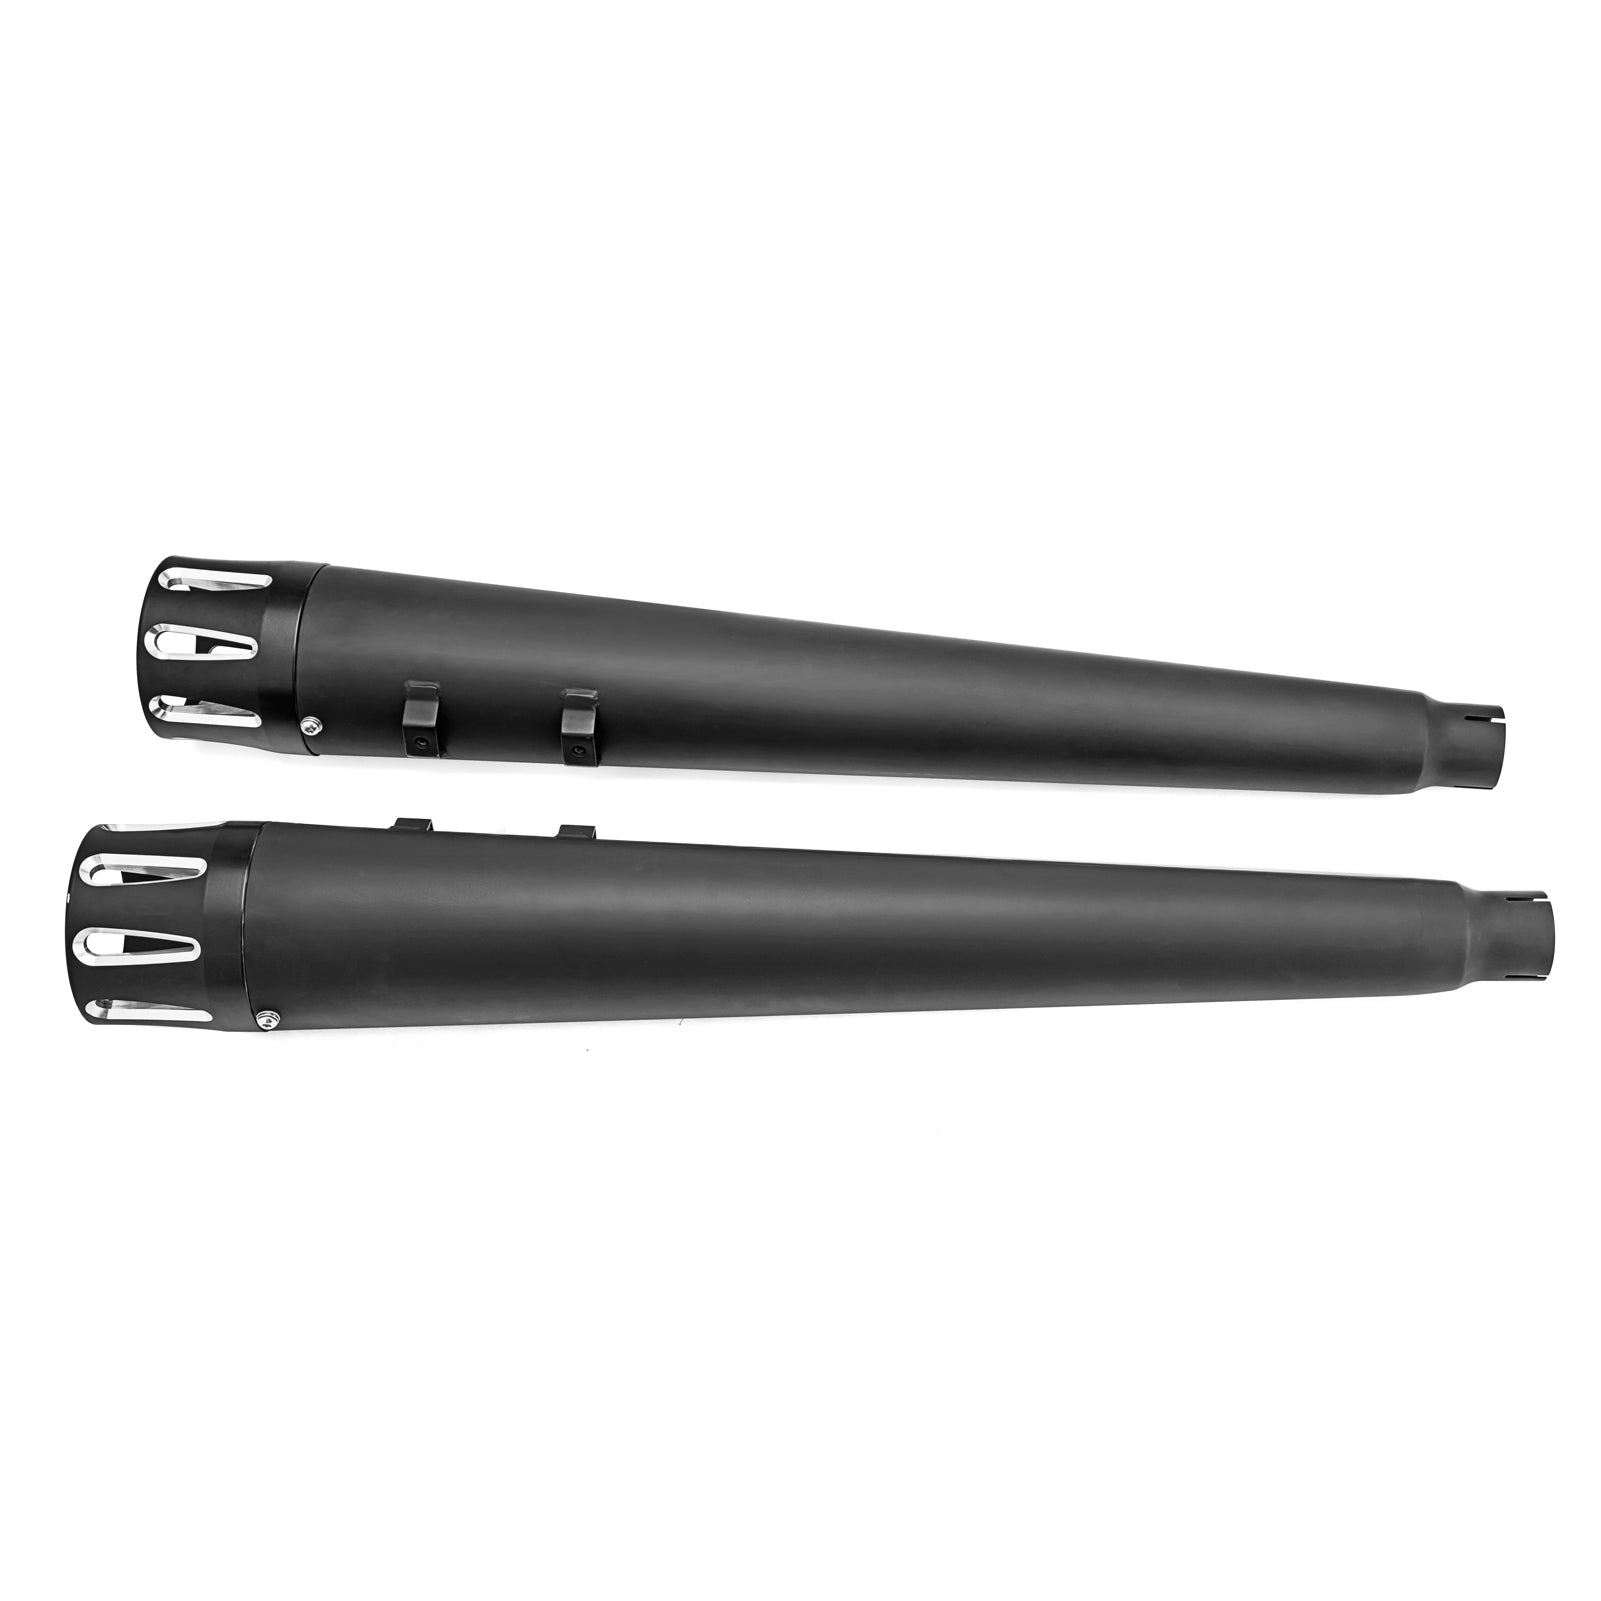 Black 4" Megaphone style Slip-On Mufflers Exhaust, Exhaust Pipes For 1995-2016 Harley Davidson Touring